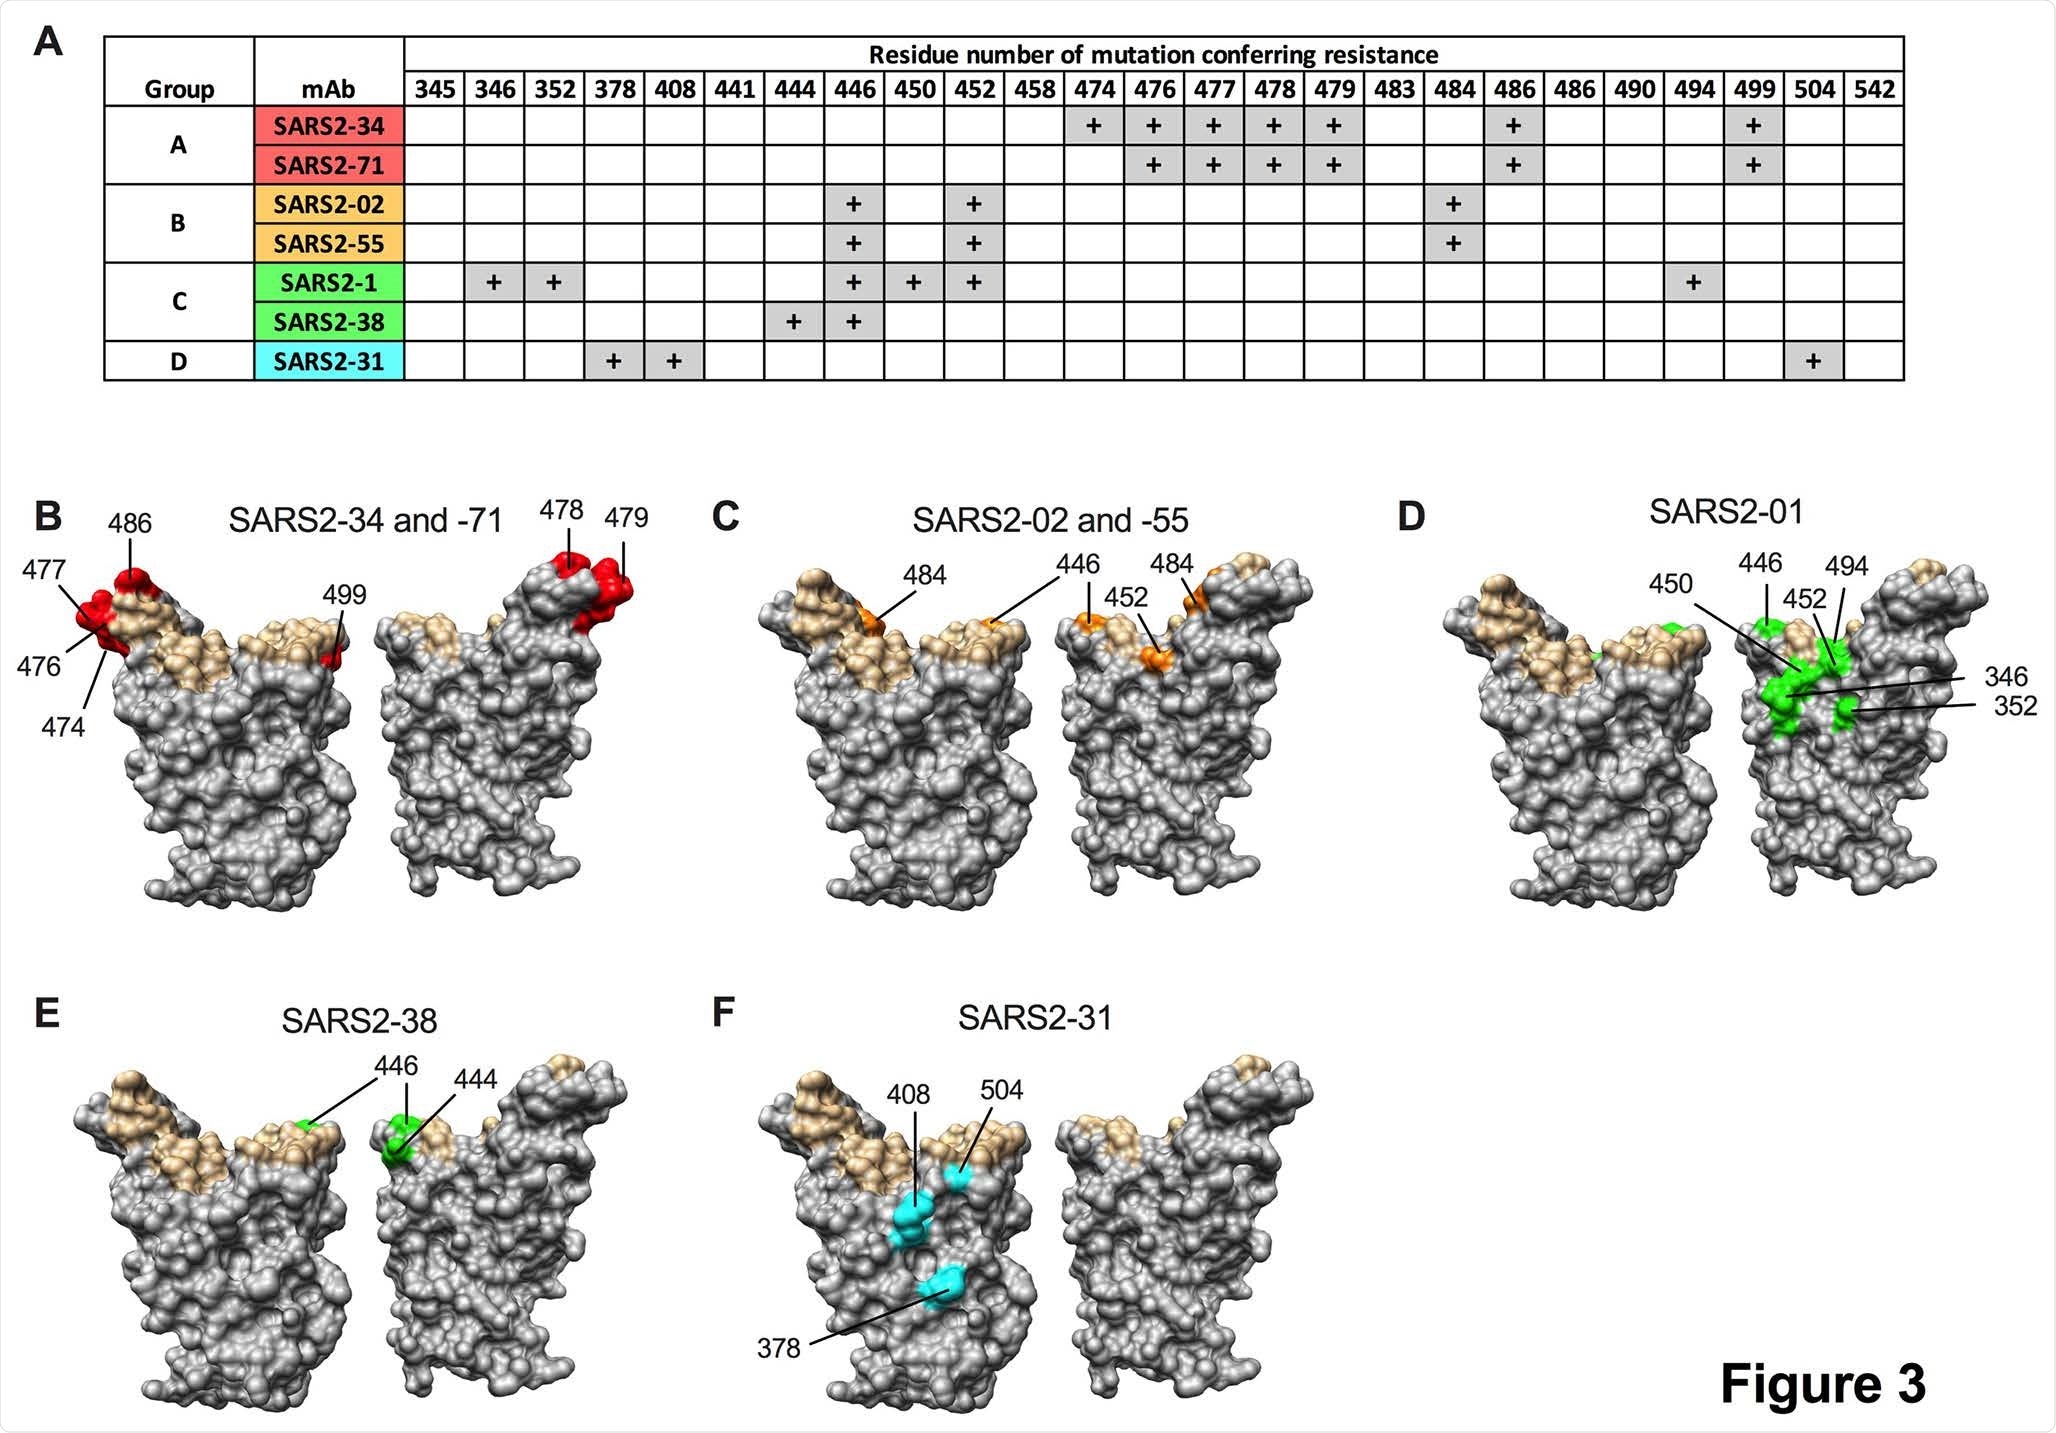 Epitopes recognized by anti-SARS-CoV-2 mAbs. mAbs were tested for neutralization potency against a panel of VSV-eGFP-SARS-COV-2-S neutralization escape mutants. (A) “+” symbol indicates resistance to neutralization when a mutation at the indicated residue number is present. (B-F) Residues from (A) are highlighted on the RBD structure (PDB 6M0J) in red, orange, green, or cyan for mAbs from group A, B, C, or D, respectively, and indicated. Residues that engage hACE2 are highlighted in tan.